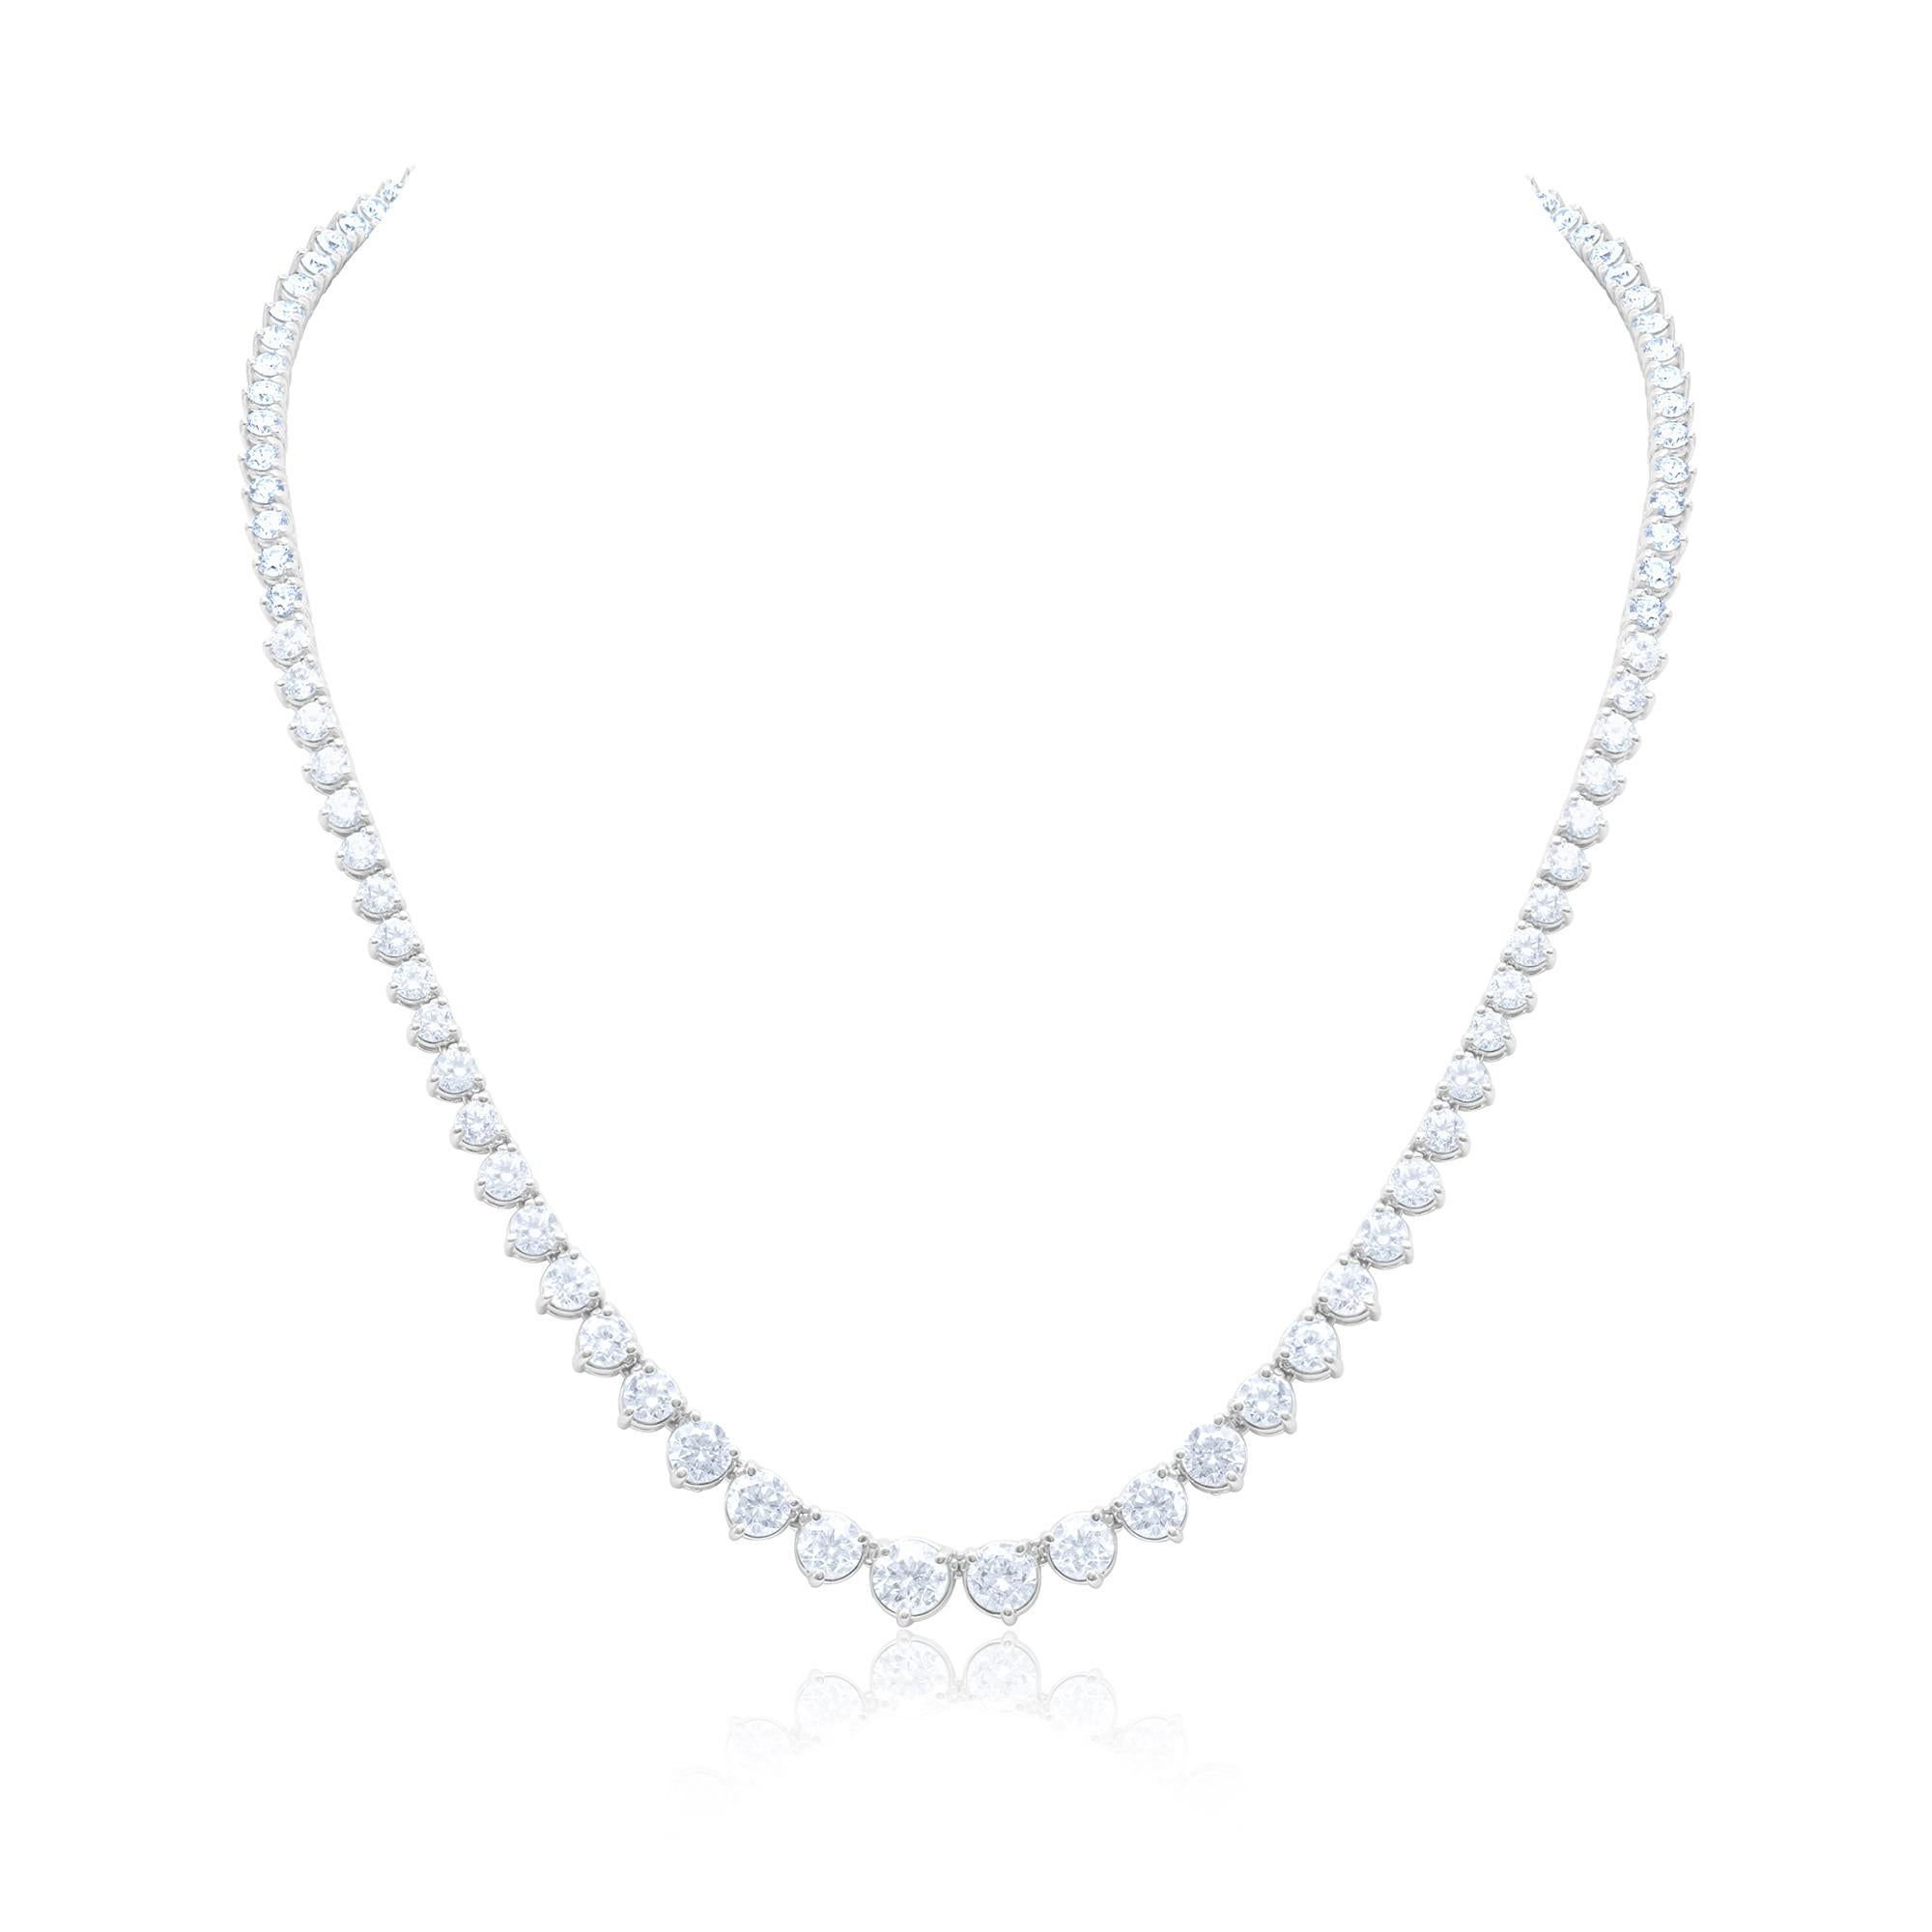 Custom 18k white gold graduated tennis necklace  24.54 cts of round brilliant diamonds 95 stones 0.26 each set in a 3 prong setting FG color SI clarity. Excellent  cut. 